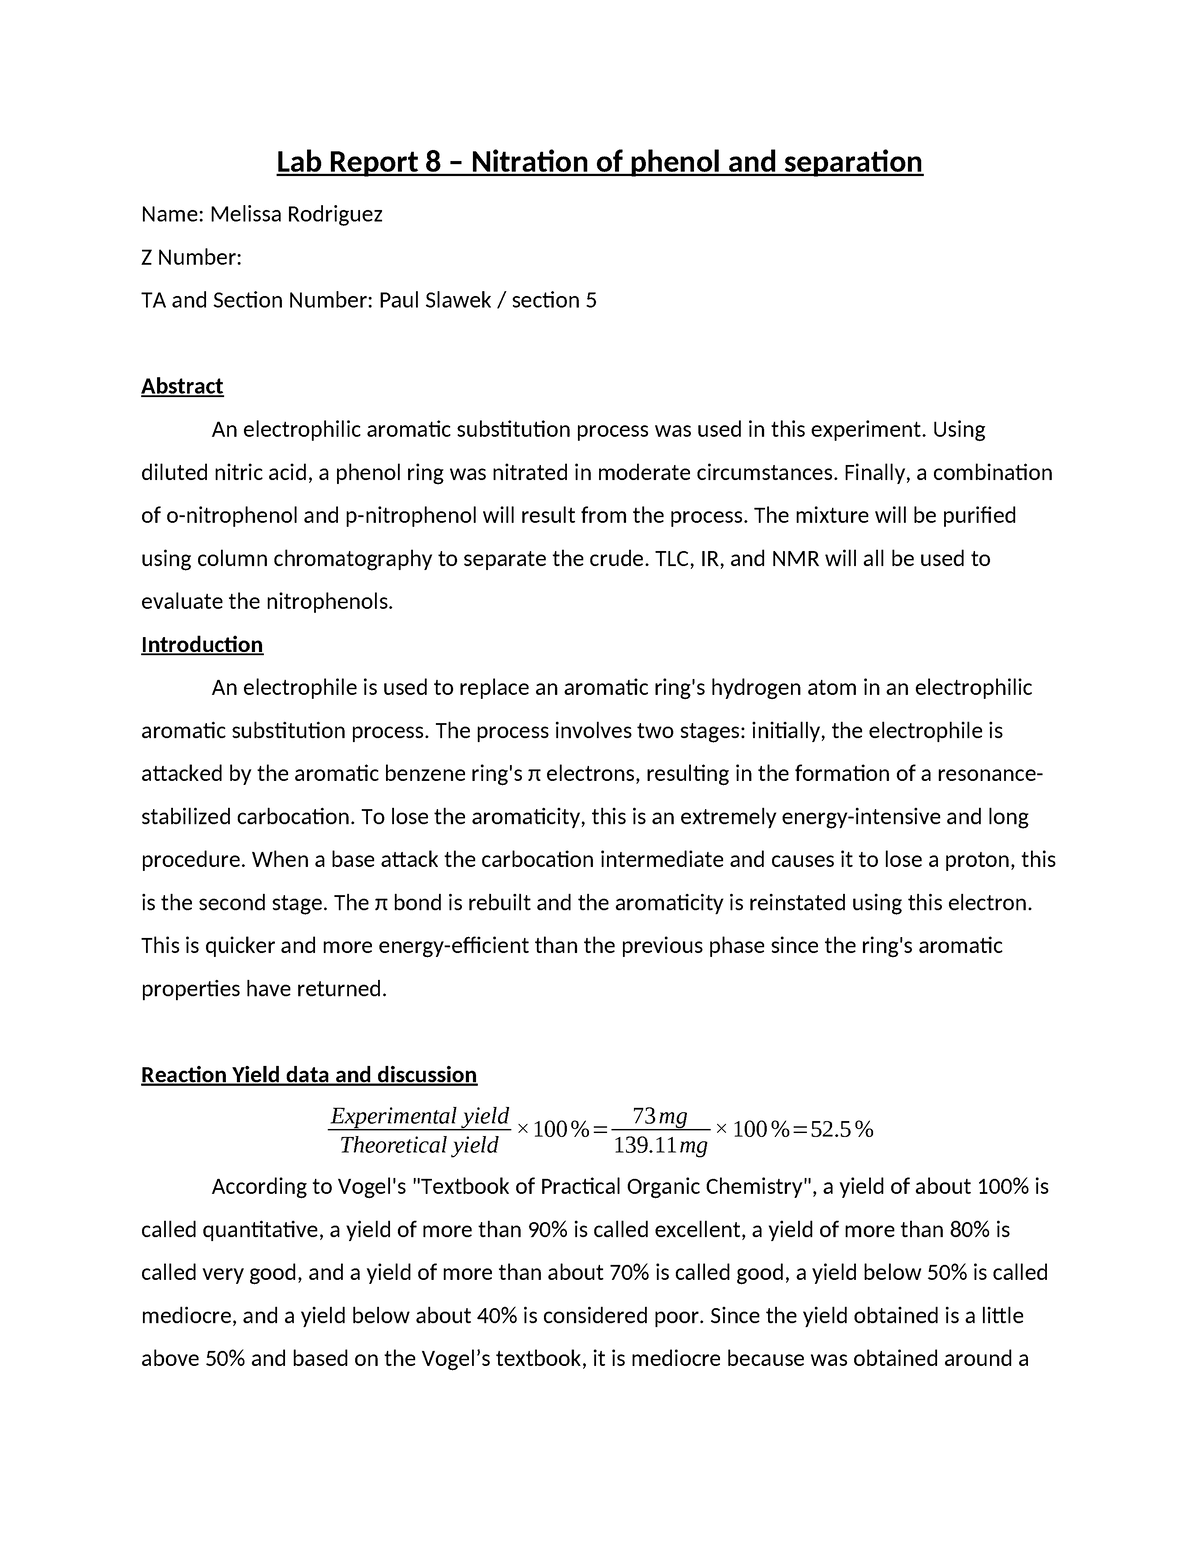 Lab Report 8 - Lab 8 - Lab Report 8 – Nitration of phenol and ...